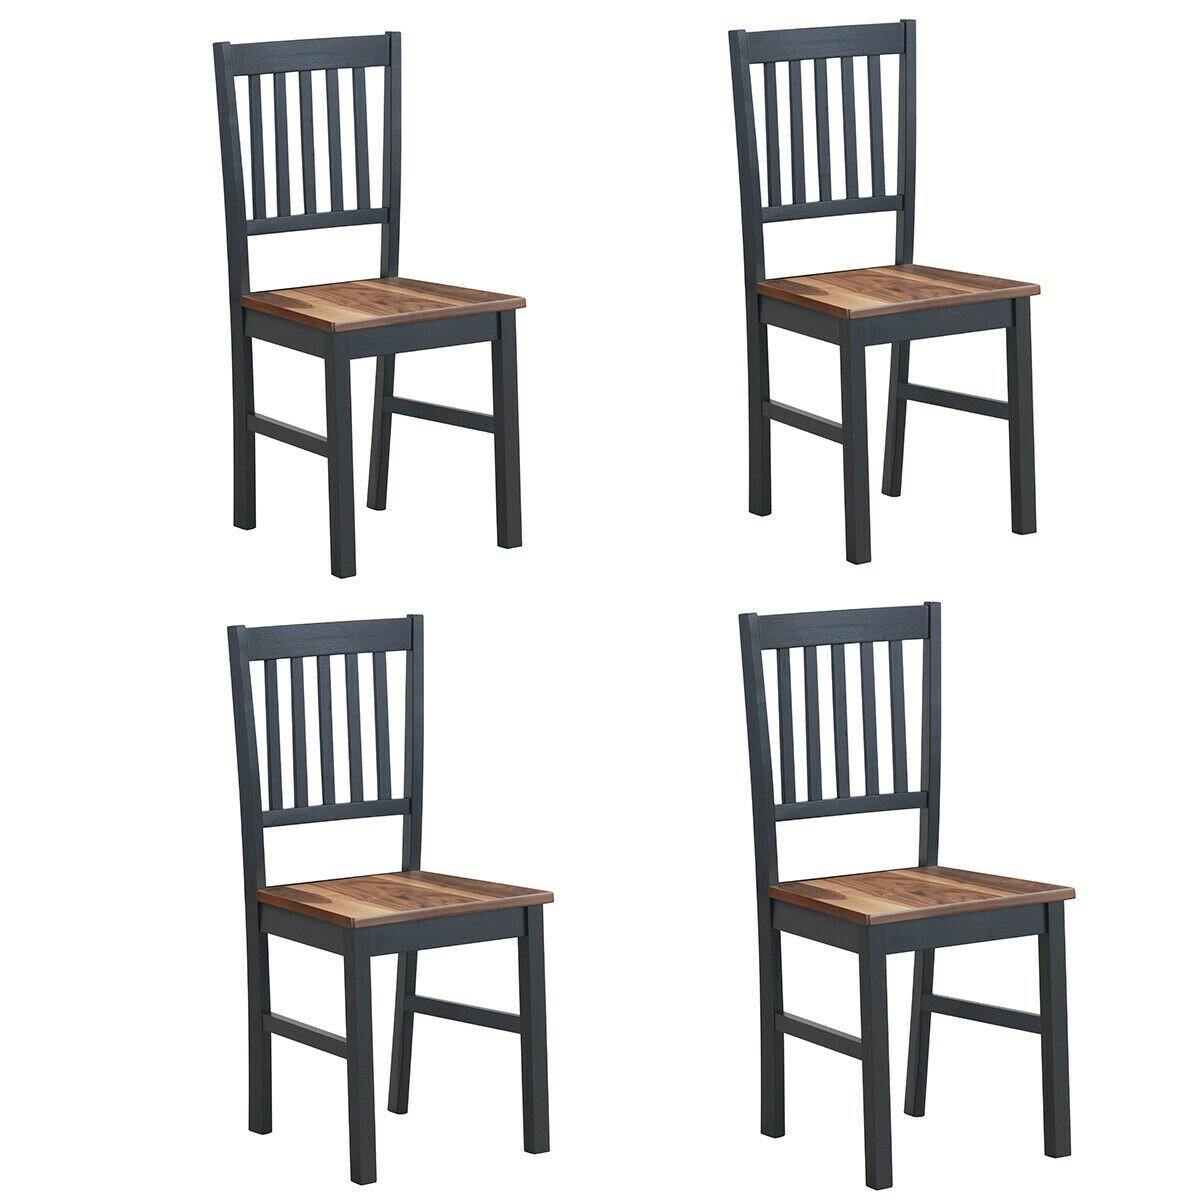 Giantex Set of 4 Wood Dining Chairs, Whitesburg Dining Room Side Chair w/ Wide Seat,Black - Giantexus